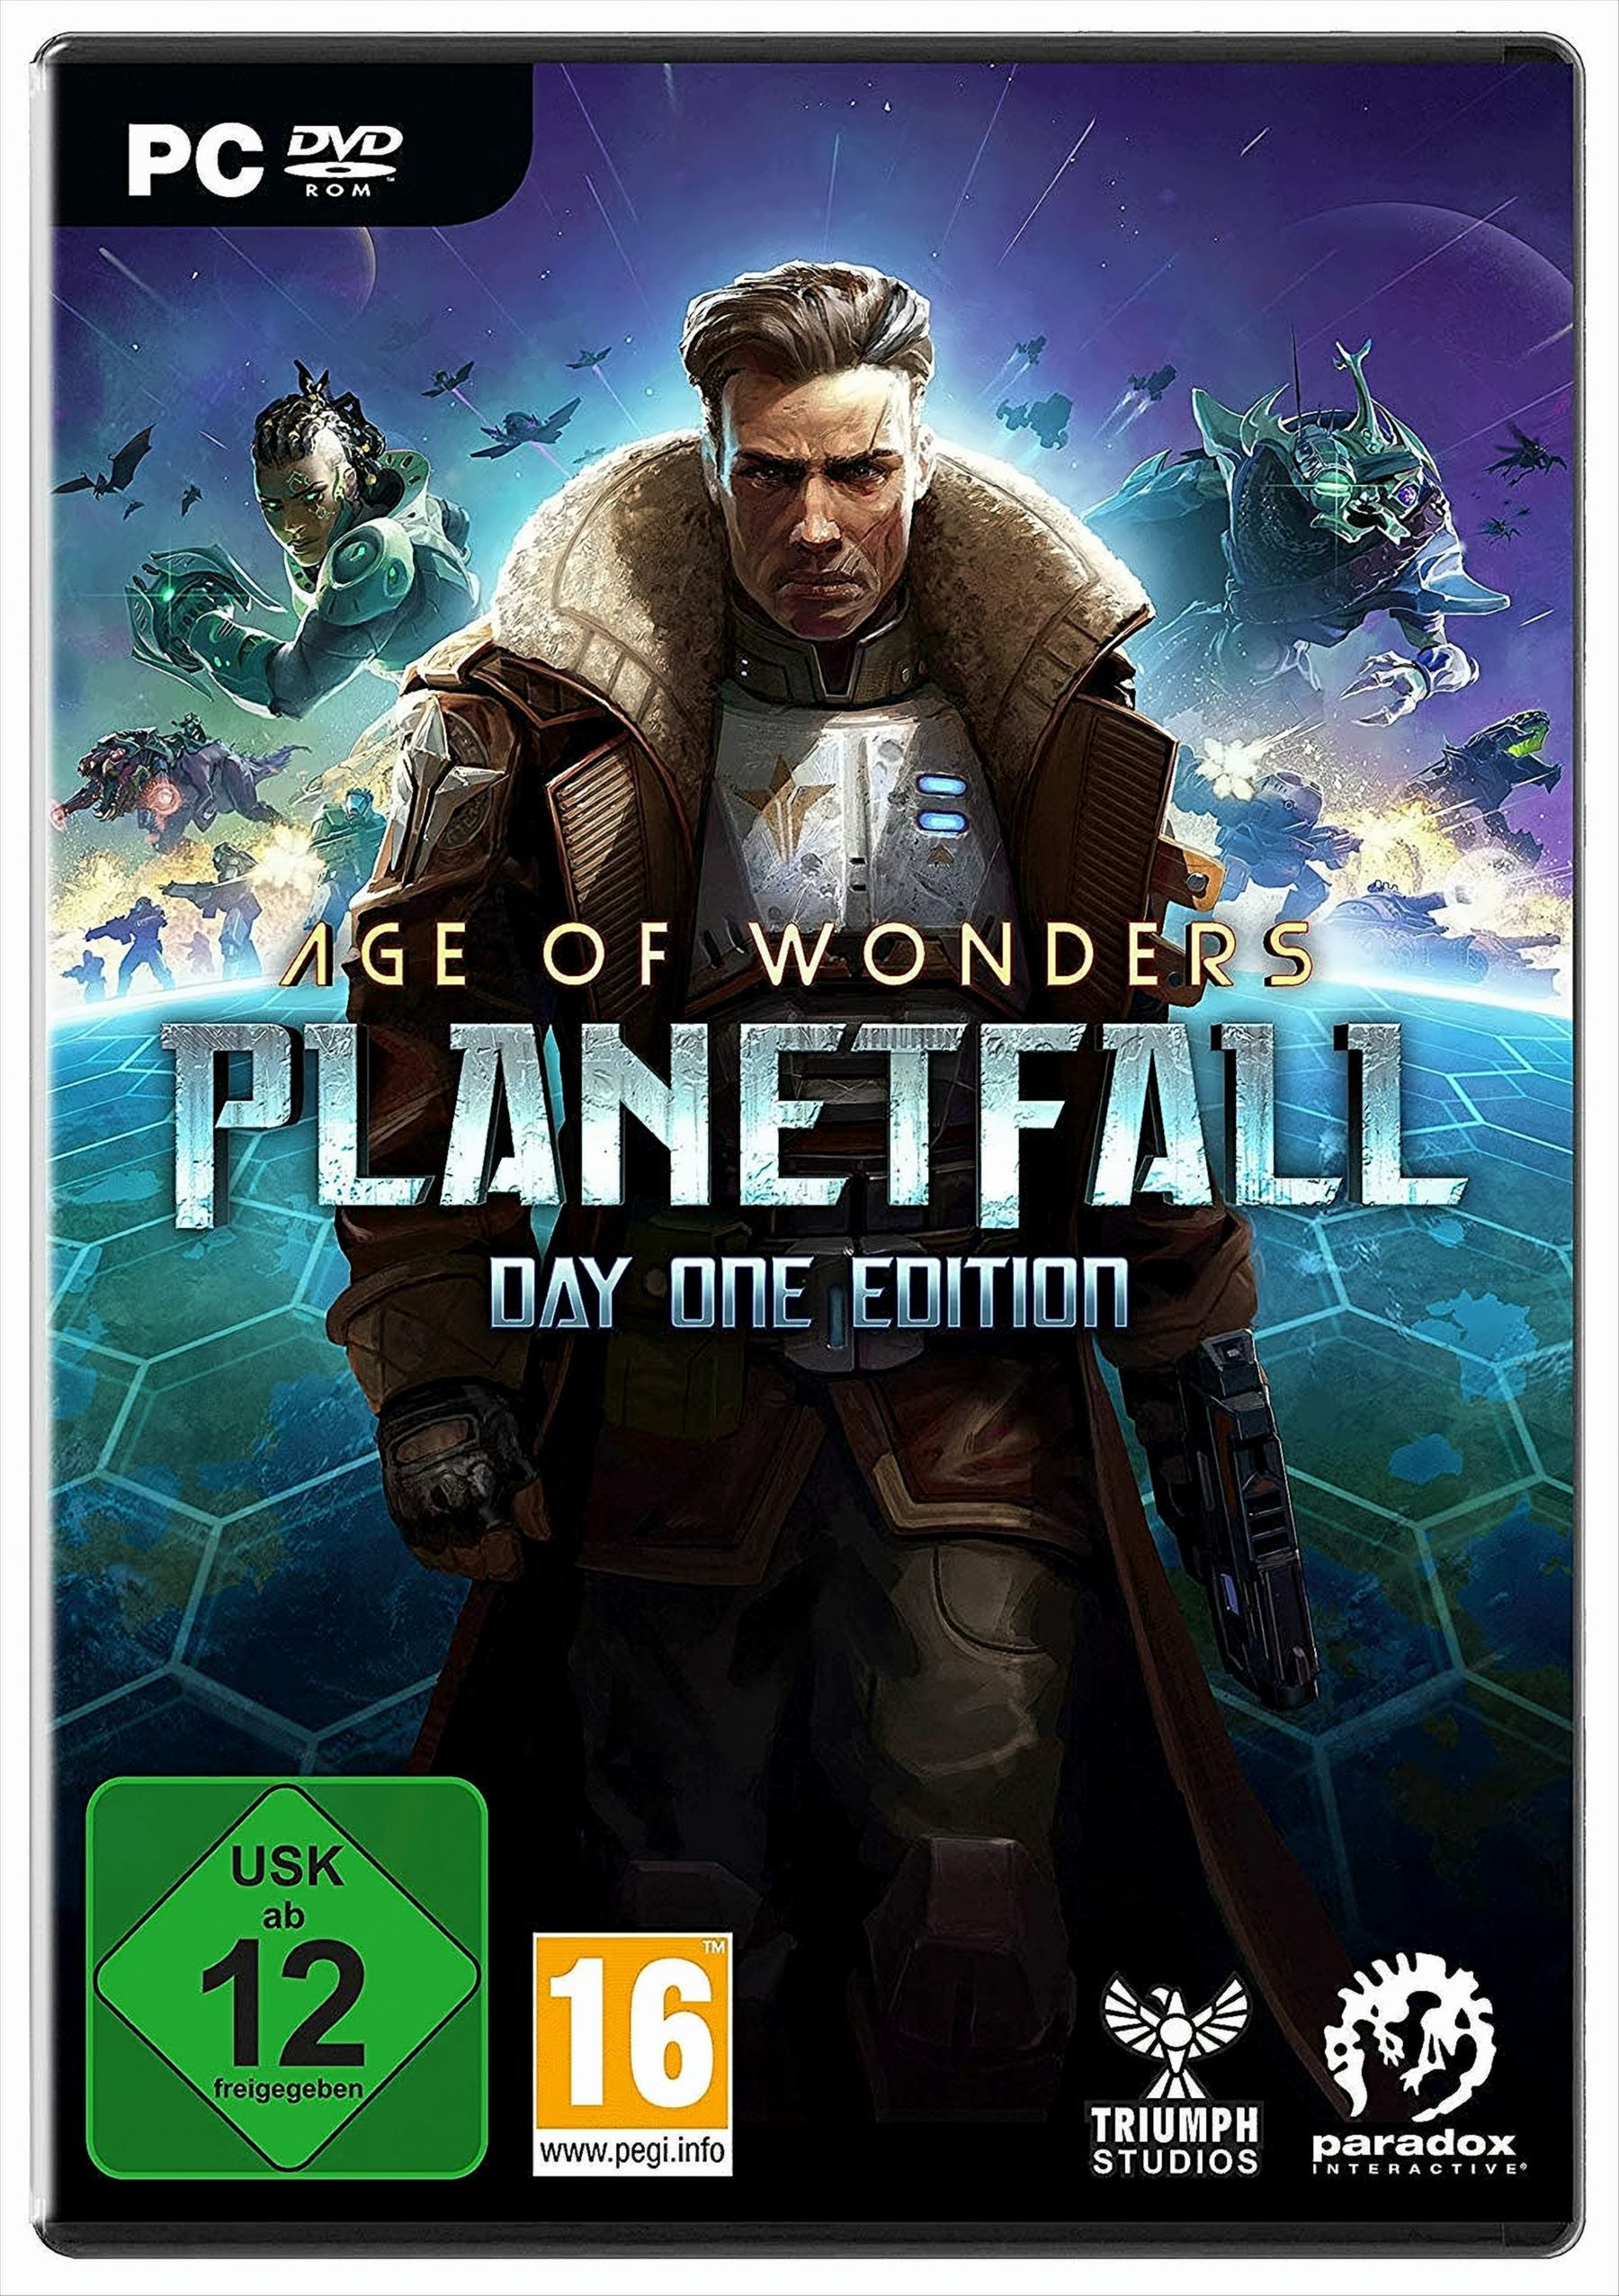 [PC] Planetfall of - One Age Edition Wonders: Day